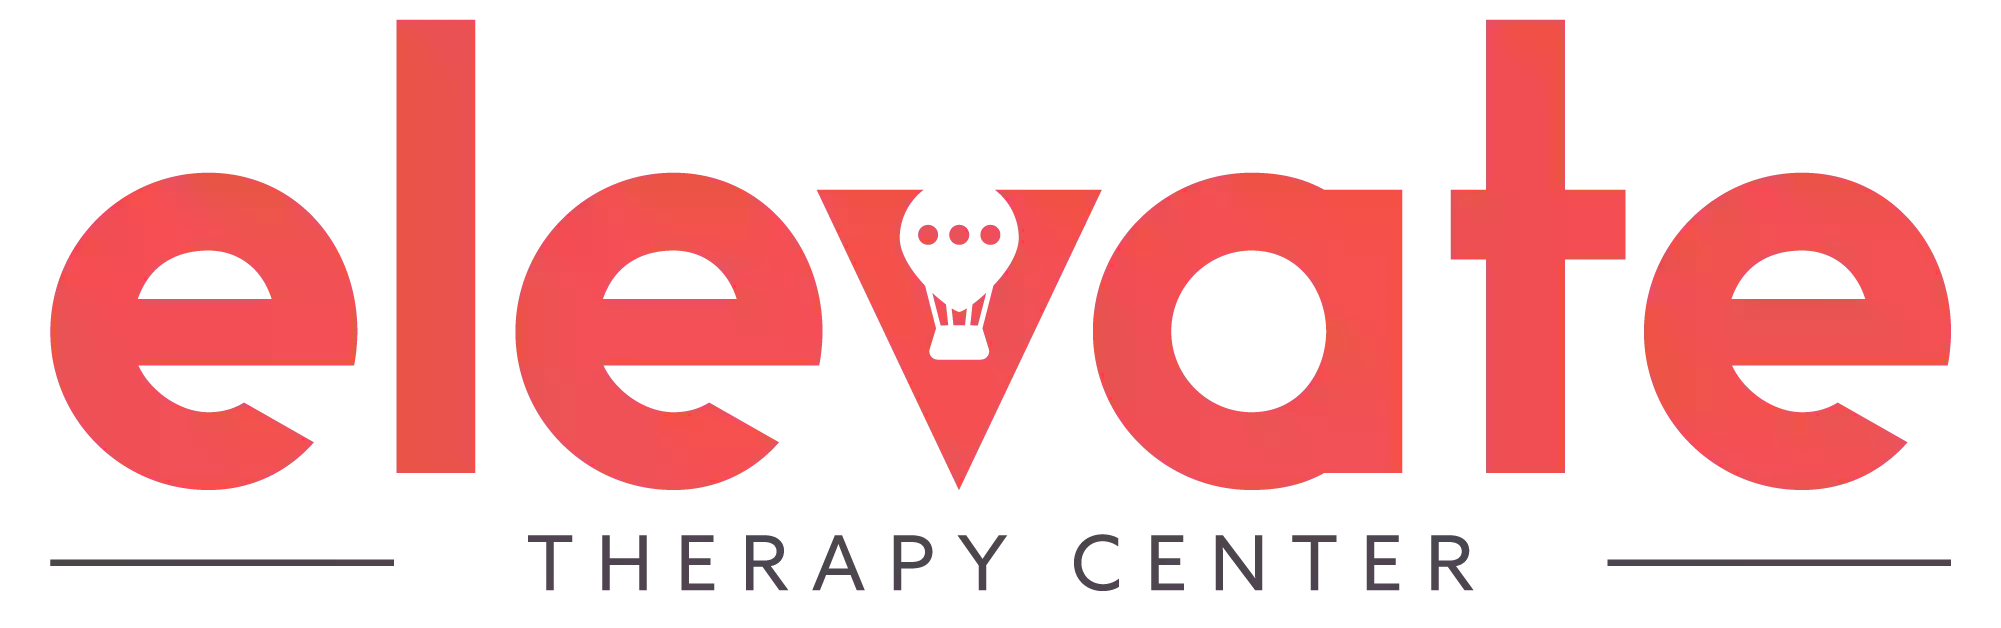 Elevate Therapy Center